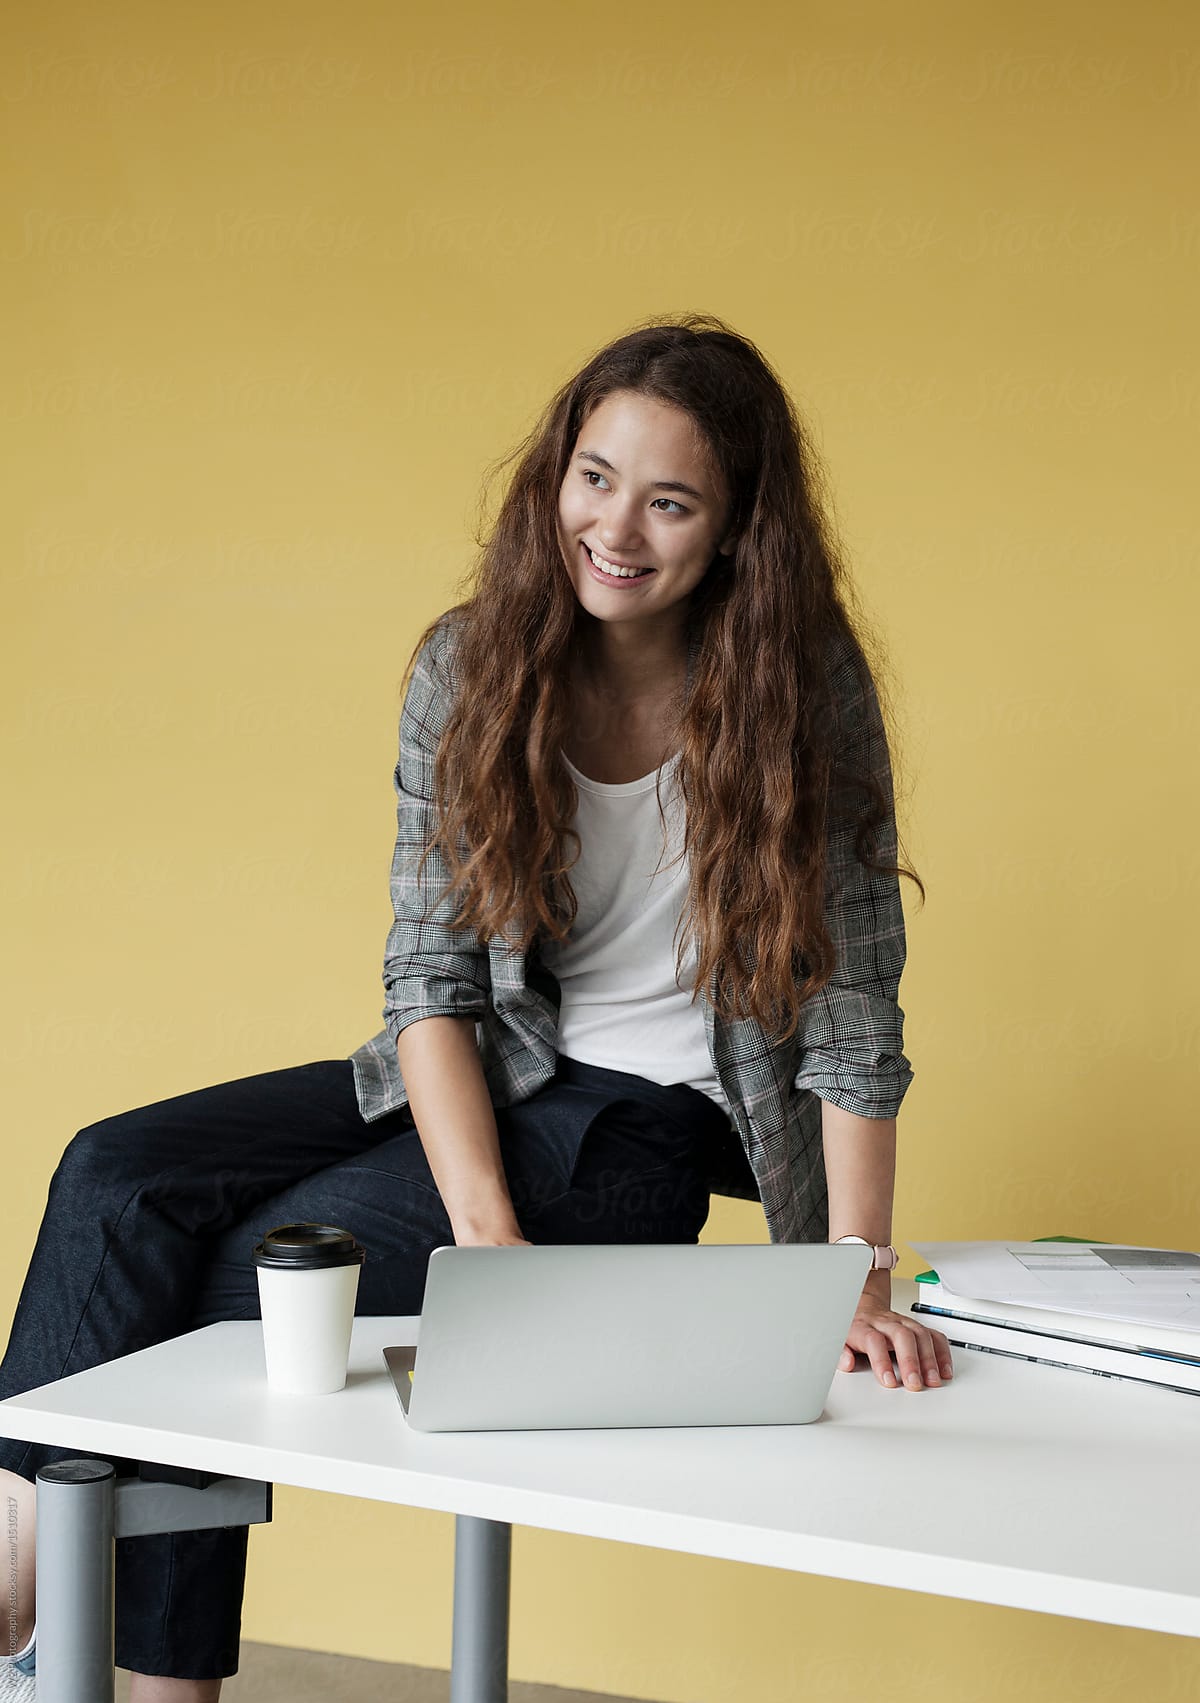 Smiling student sitting on her school desk against a yellow wall.